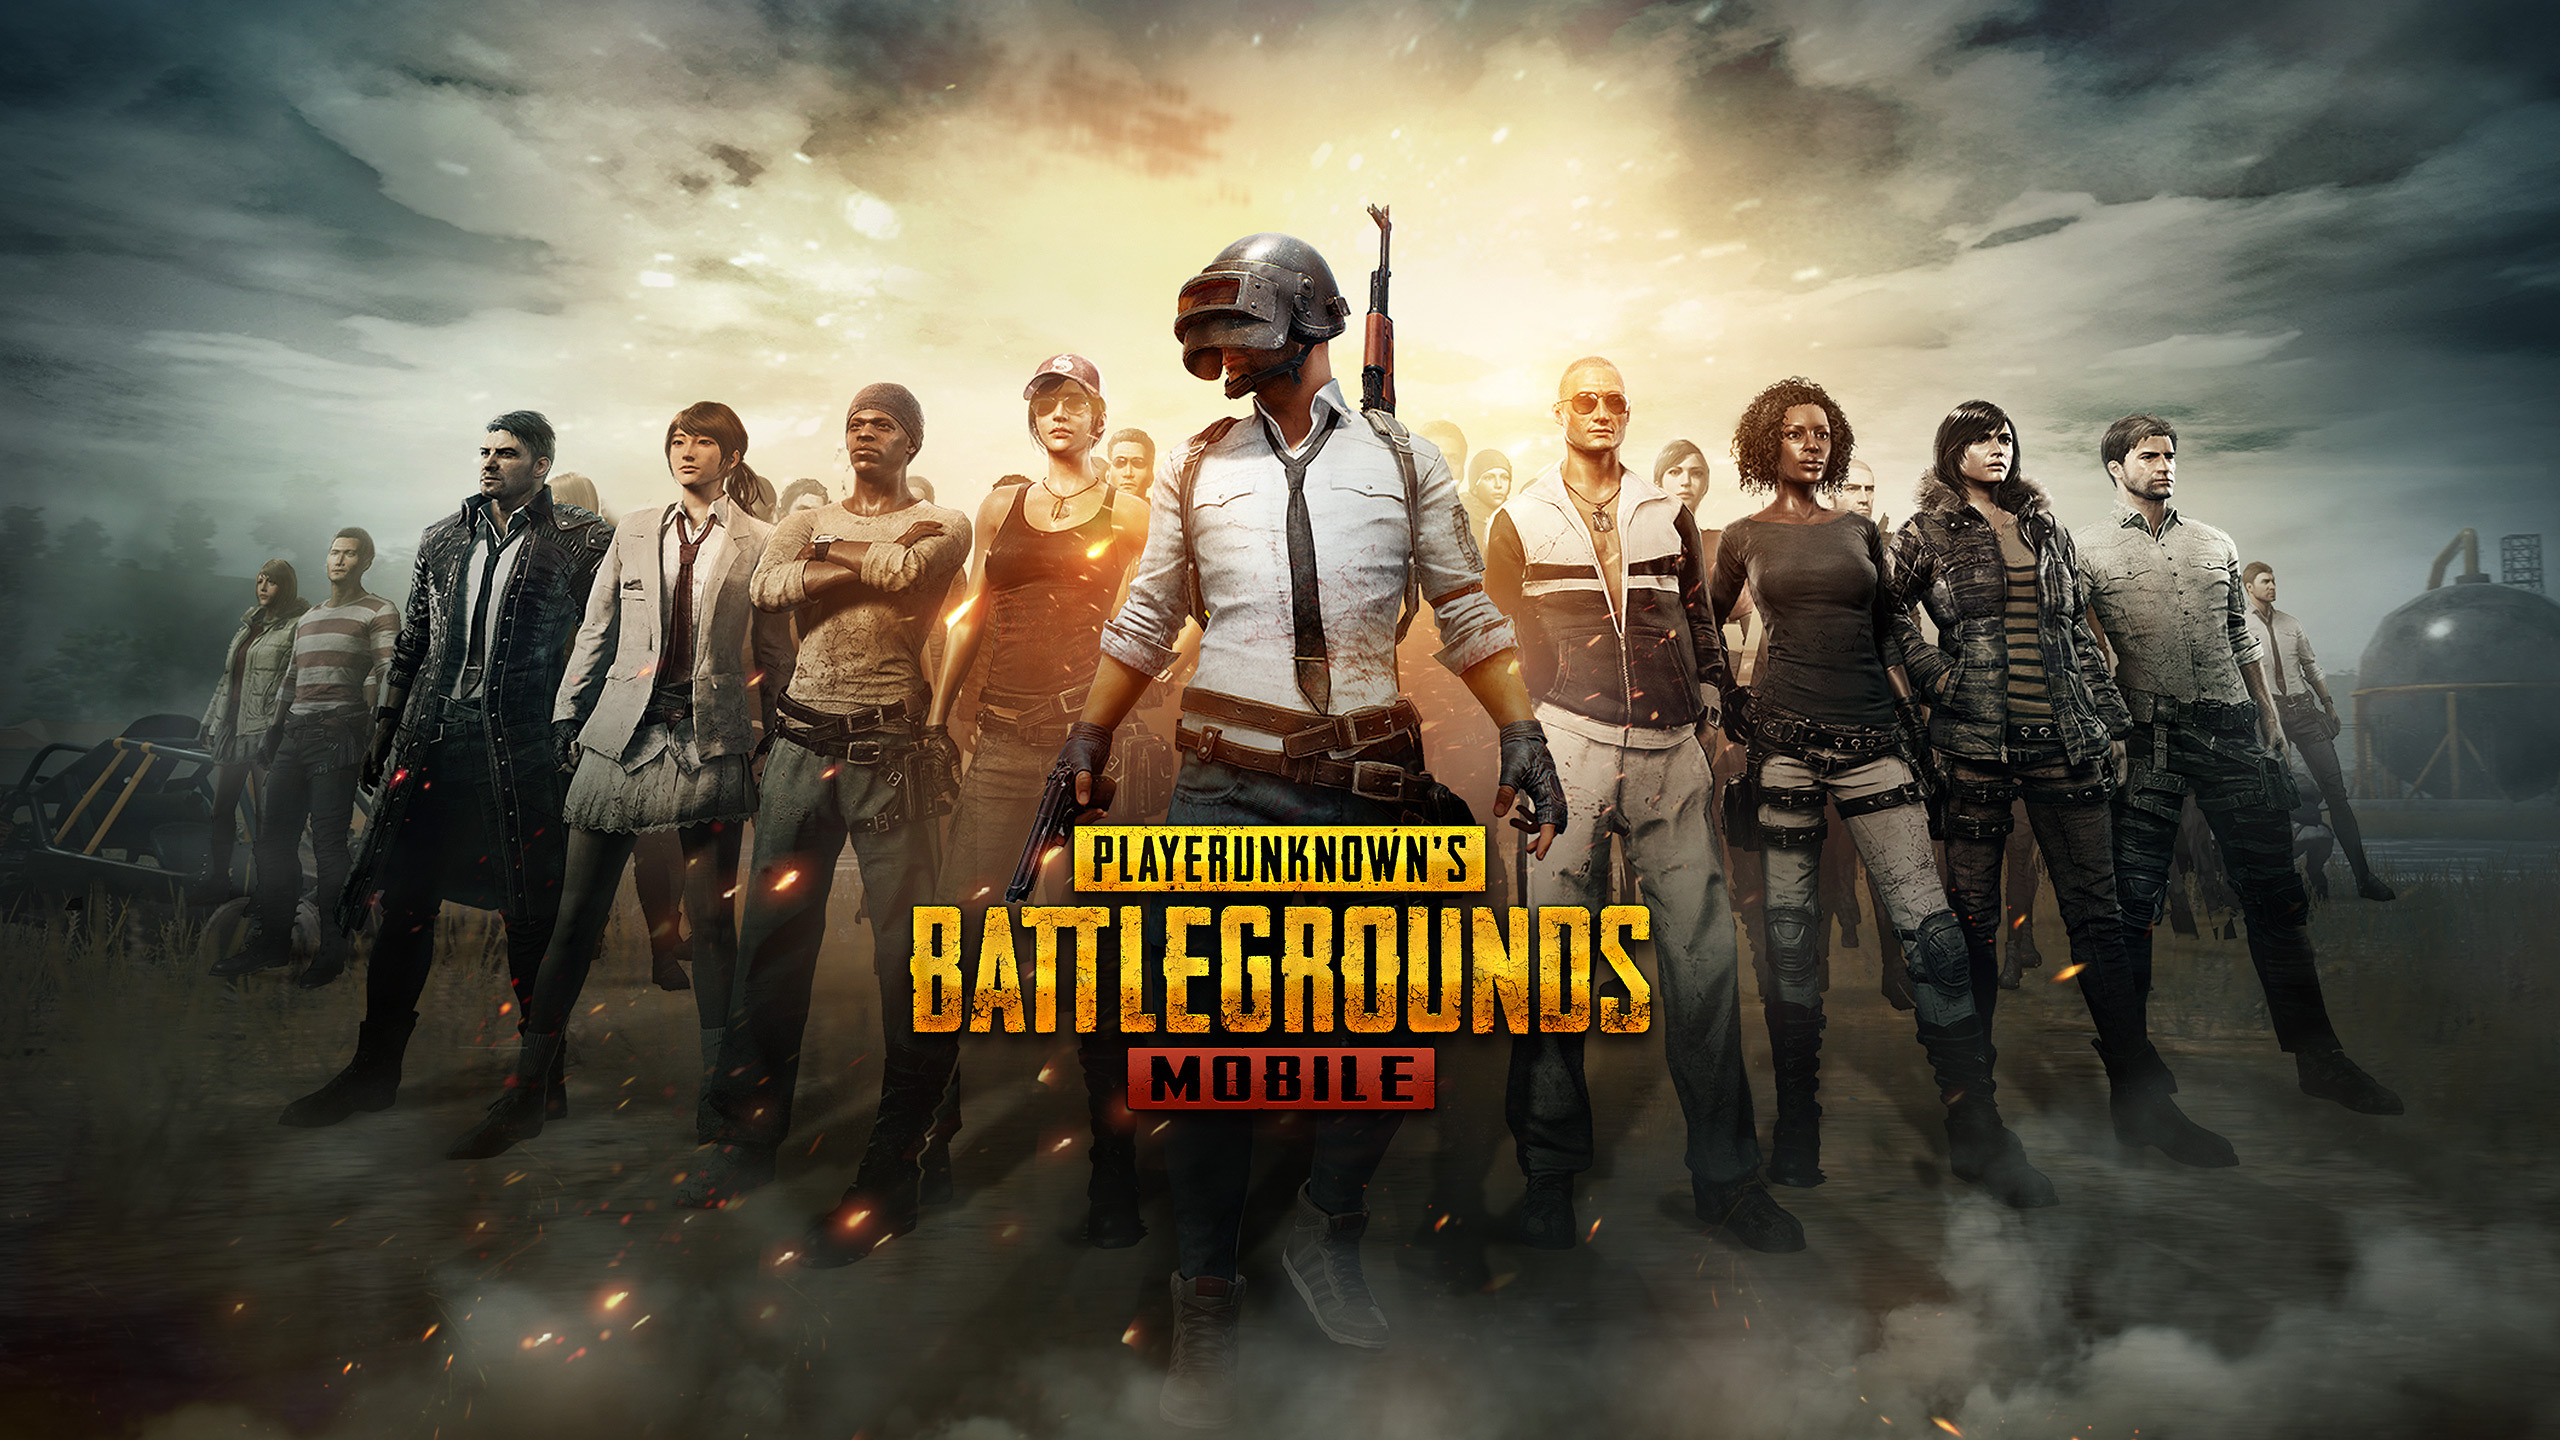 How to Skip PUBG Tutorial and Training?